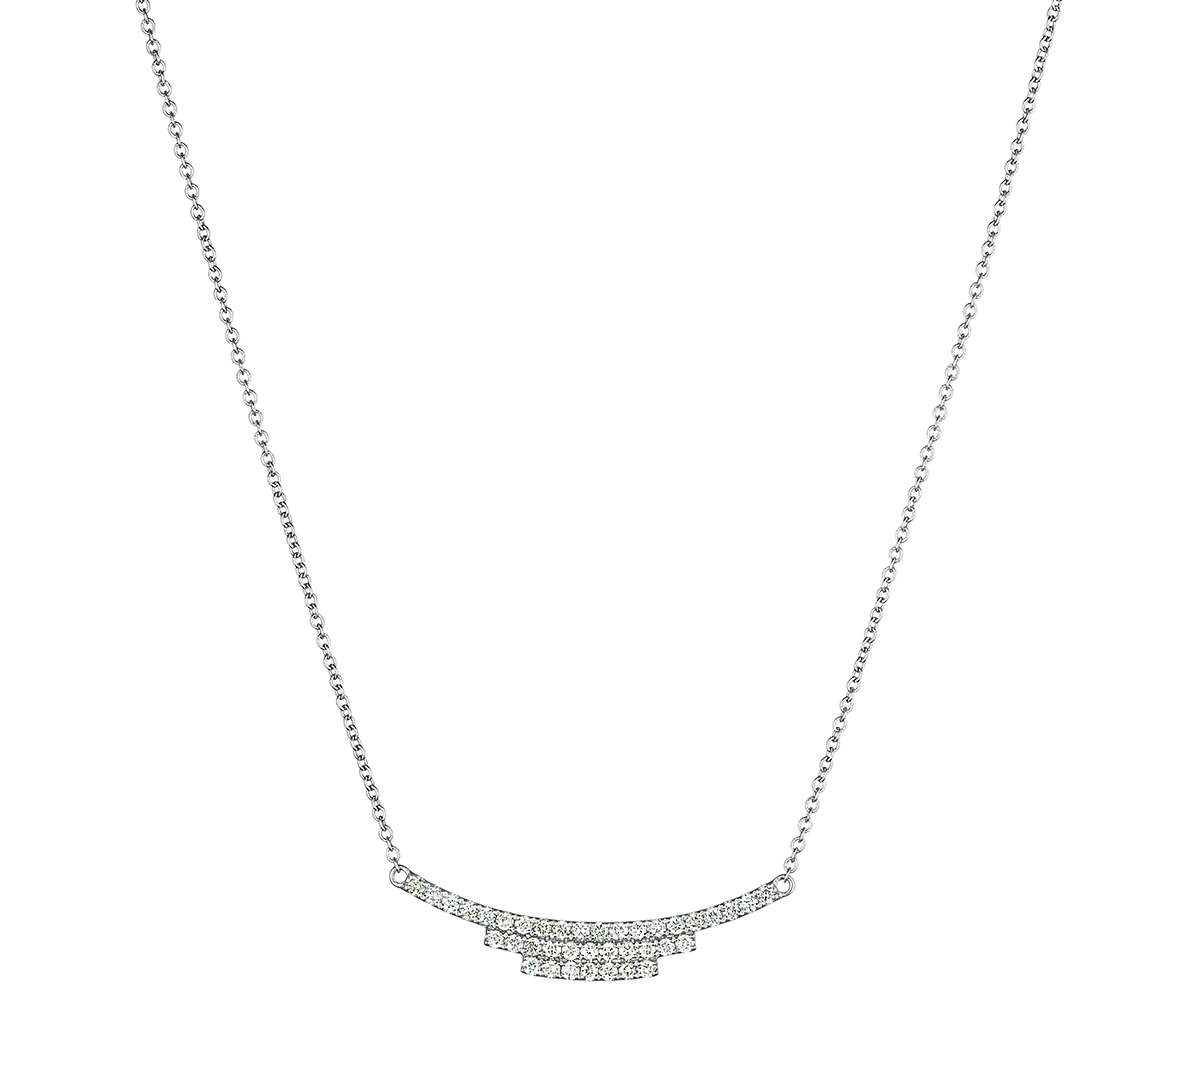 Sabel Collection 14K White Gold Diamond Triple Curved Bar Necklace